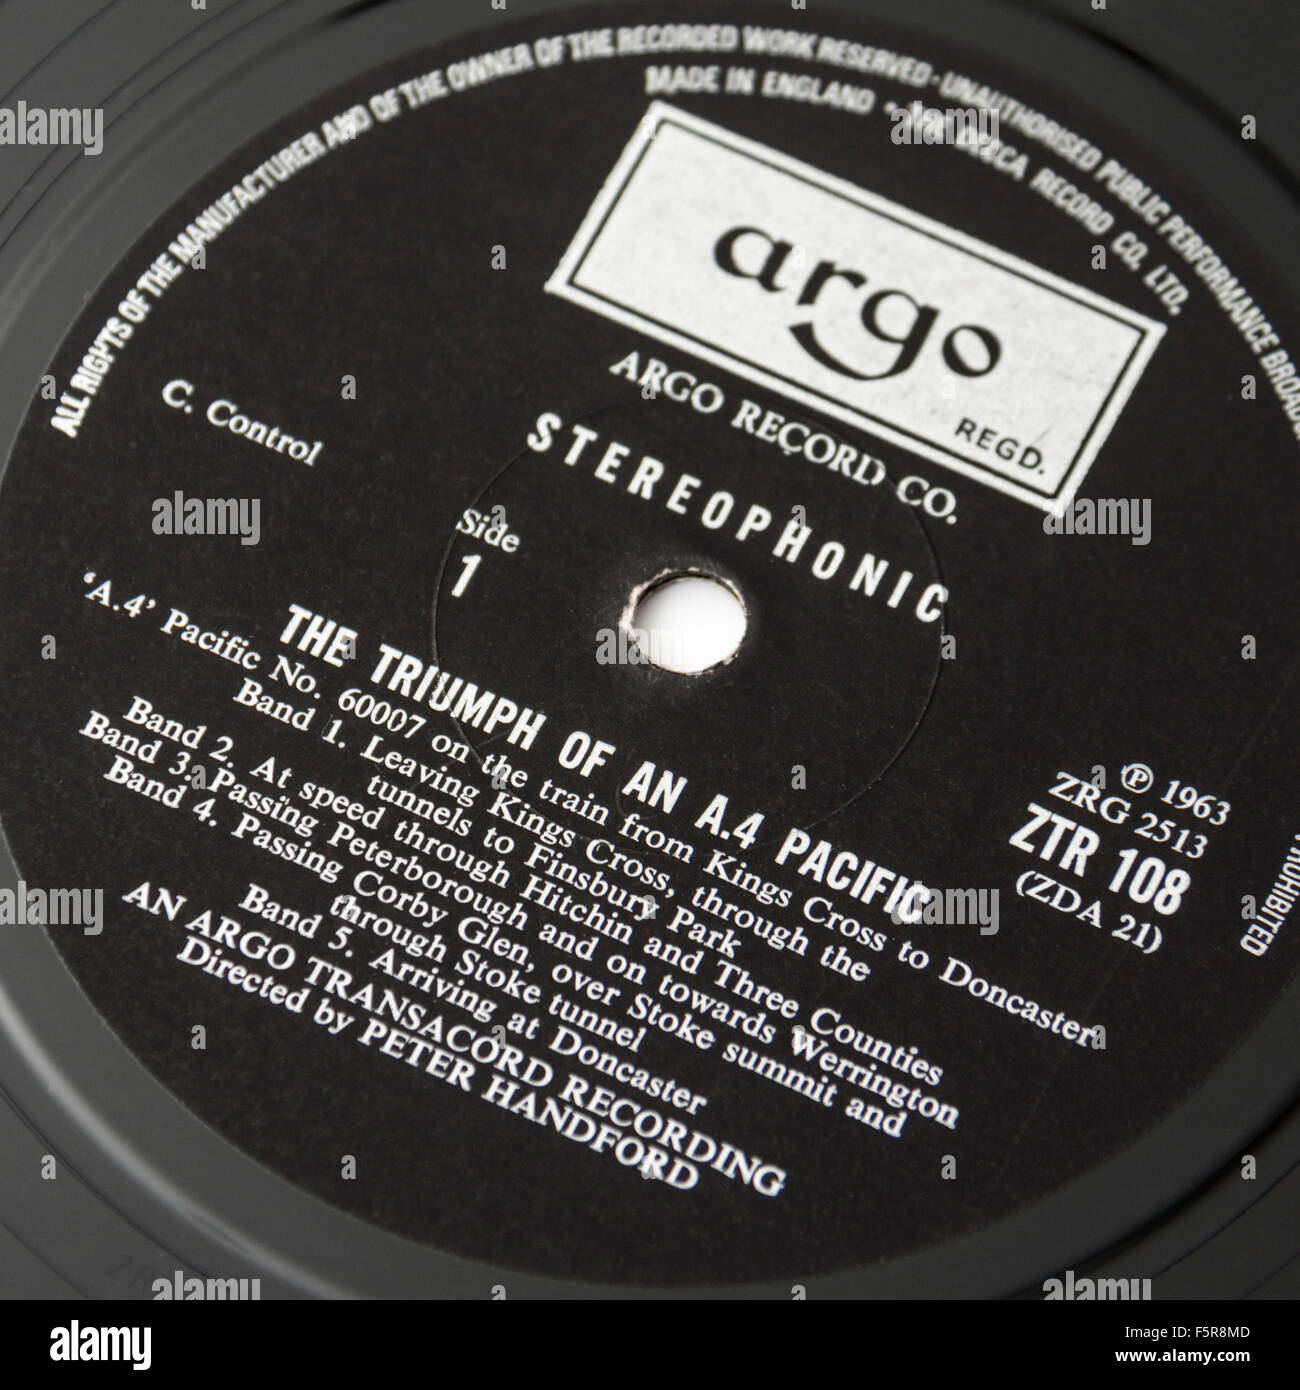 ARGO TRANSACORD recording / LP (ZTR108) of the record breaking journey in 1959 of the A.4 Pacific No 60007 'Sir Nigel Gresley'. Stock Photo